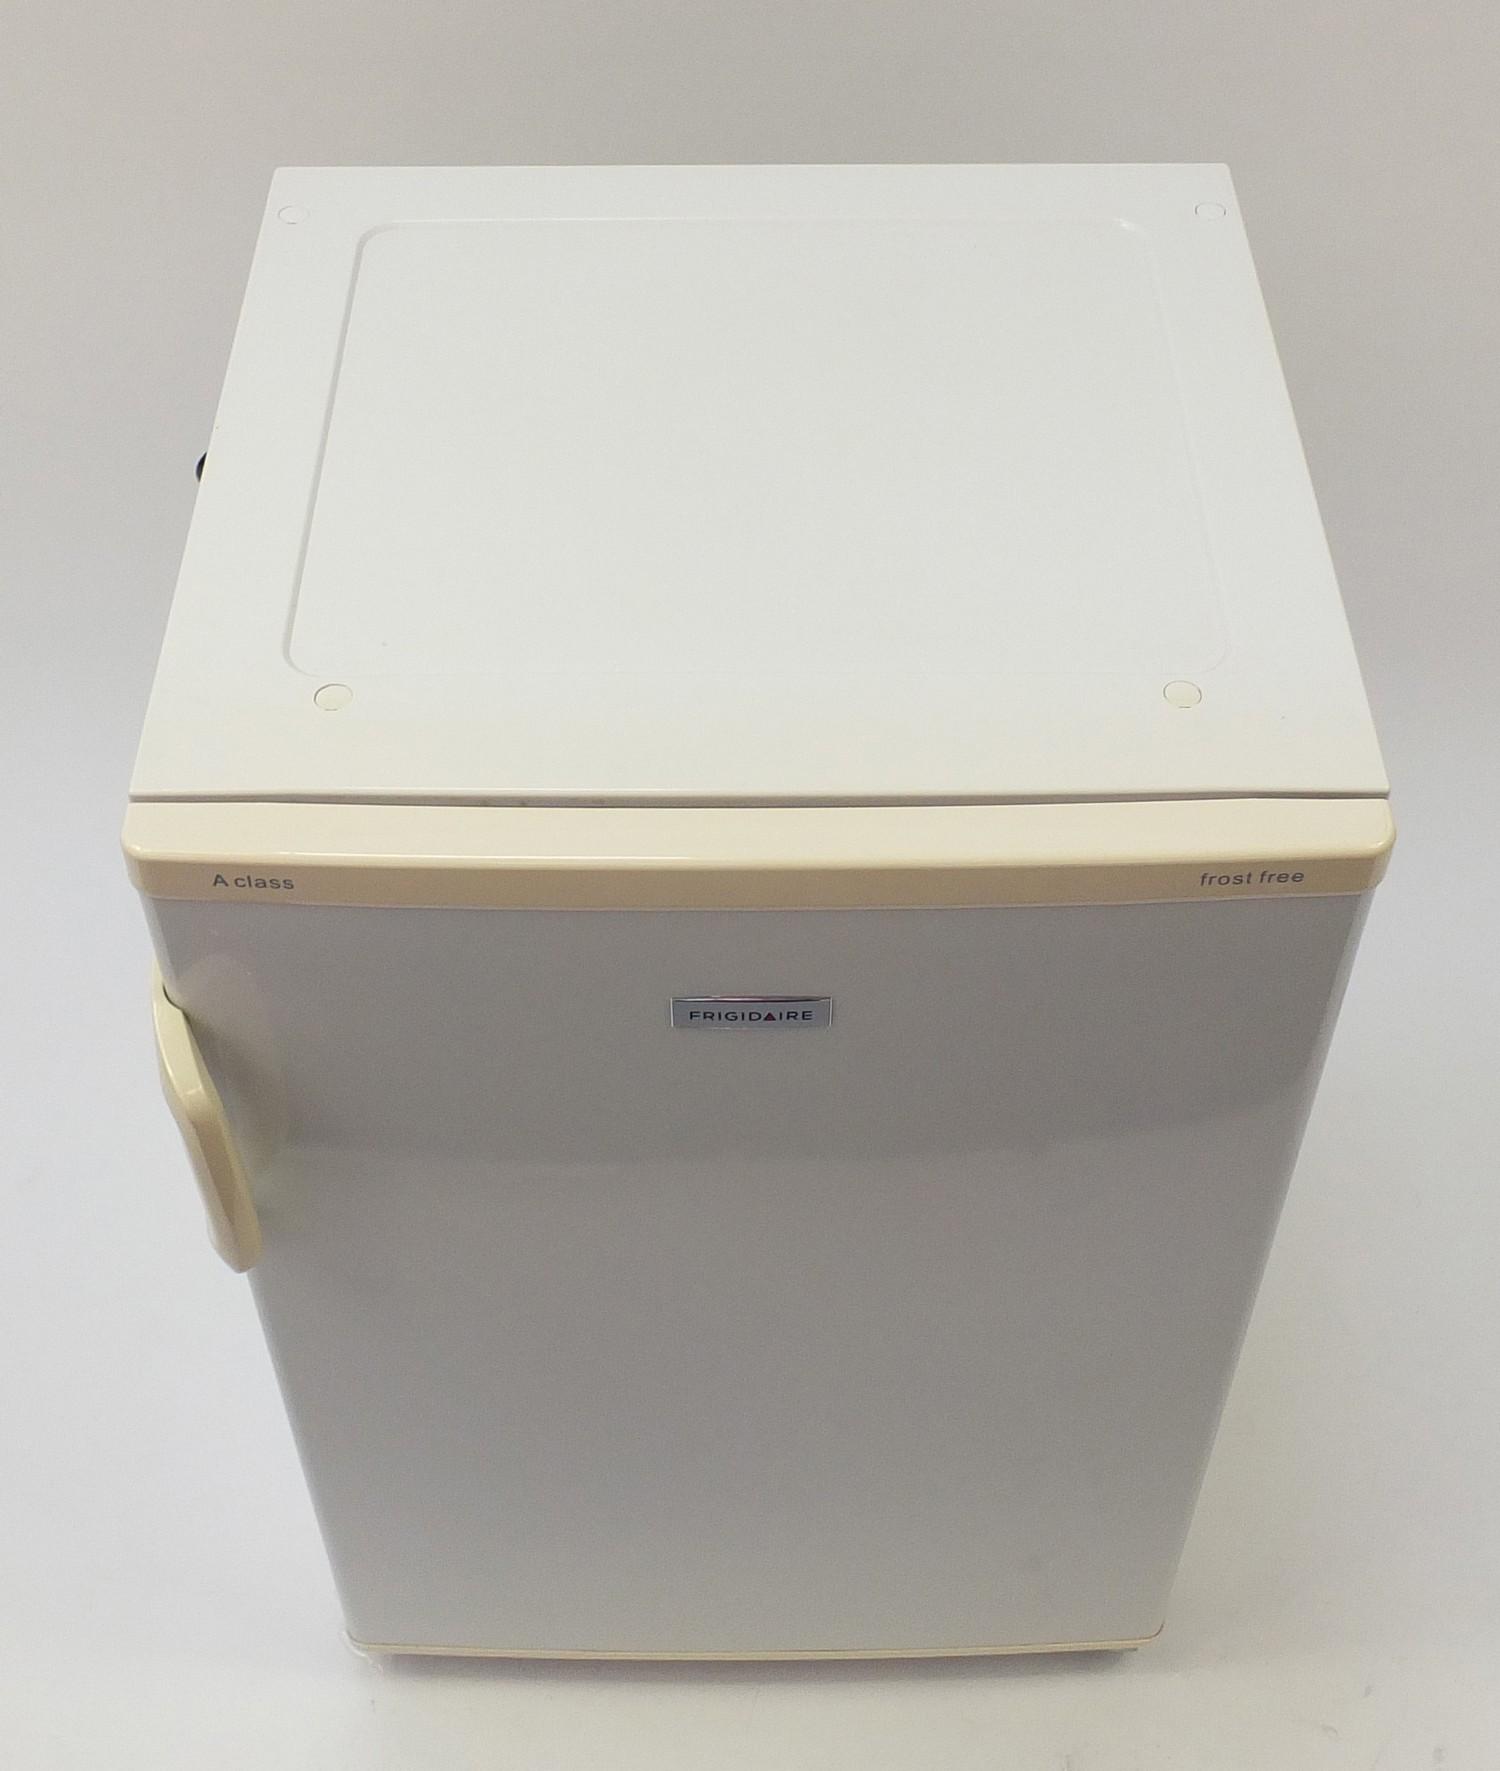 Frigidaire A class frost free freezer, 85cm H x 56cm W x 55cm D : For Further Condition Reports - Image 2 of 5